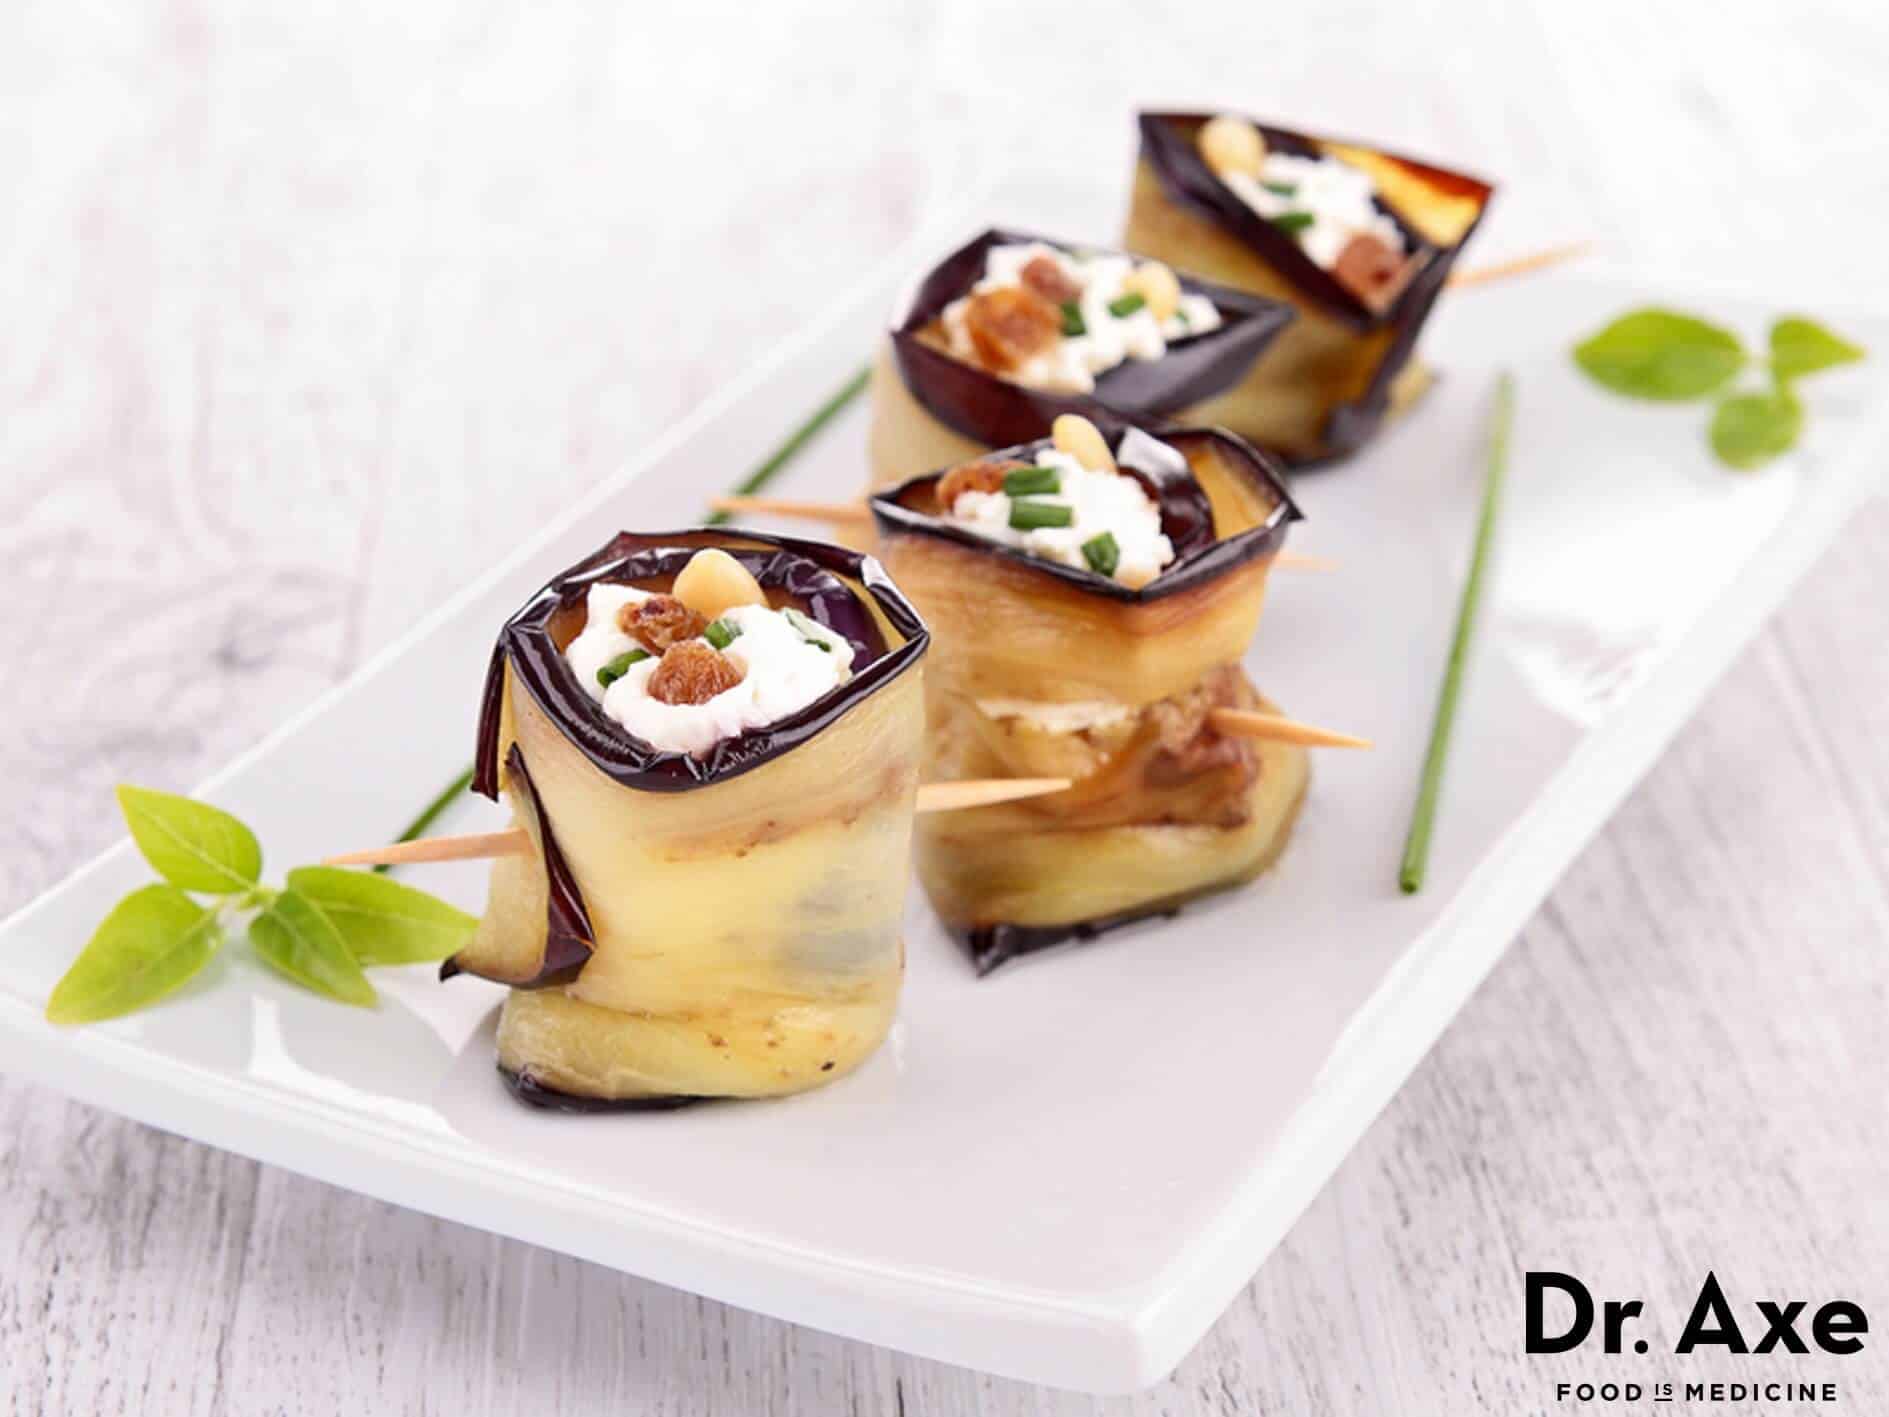 Eggplant wrapped goat cheese recipe - Dr. Axe